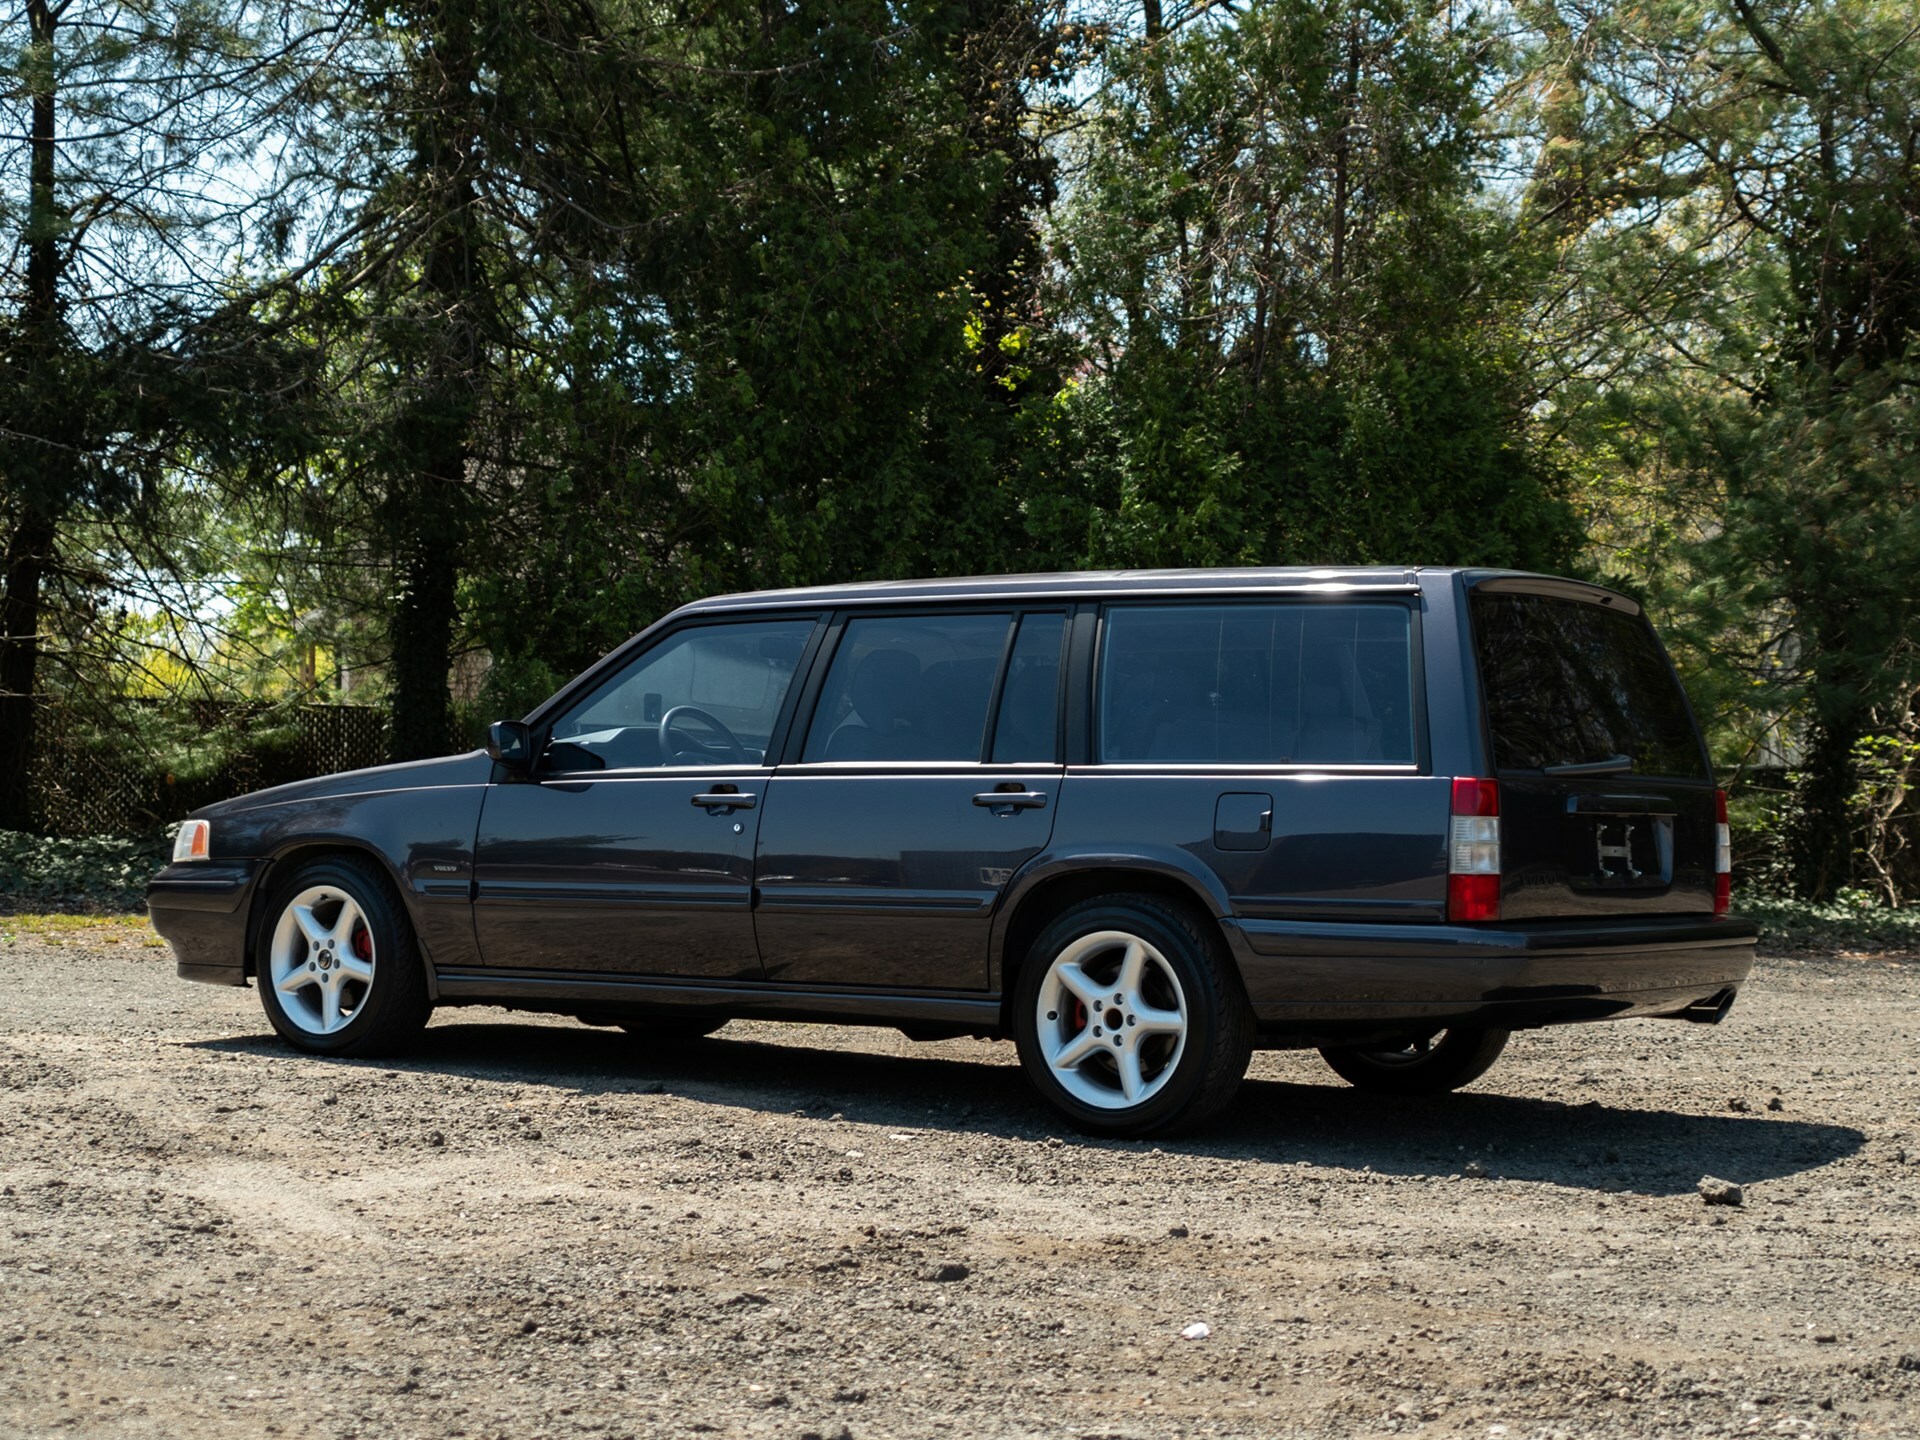 Paul Newmans Souped Up Volvo Wagon Is A Corvette V Powered Sleeper